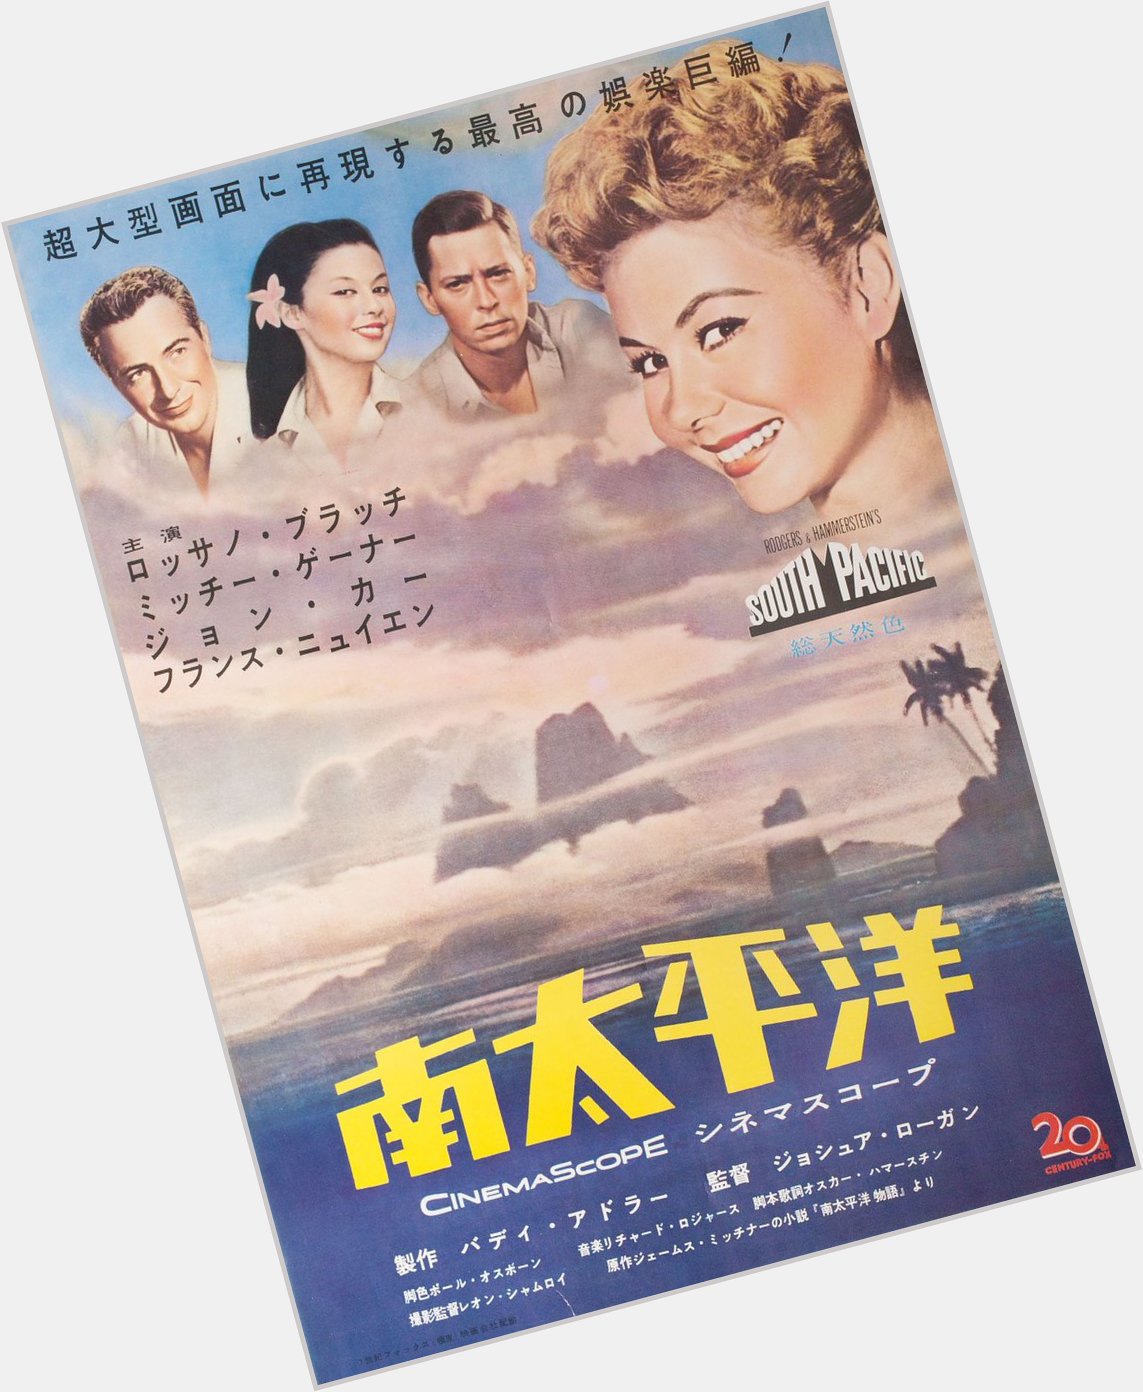 Happy birthday to Mitzi Gaynor - SOUTH PACIFIC - 1958 - Japanese release poster 